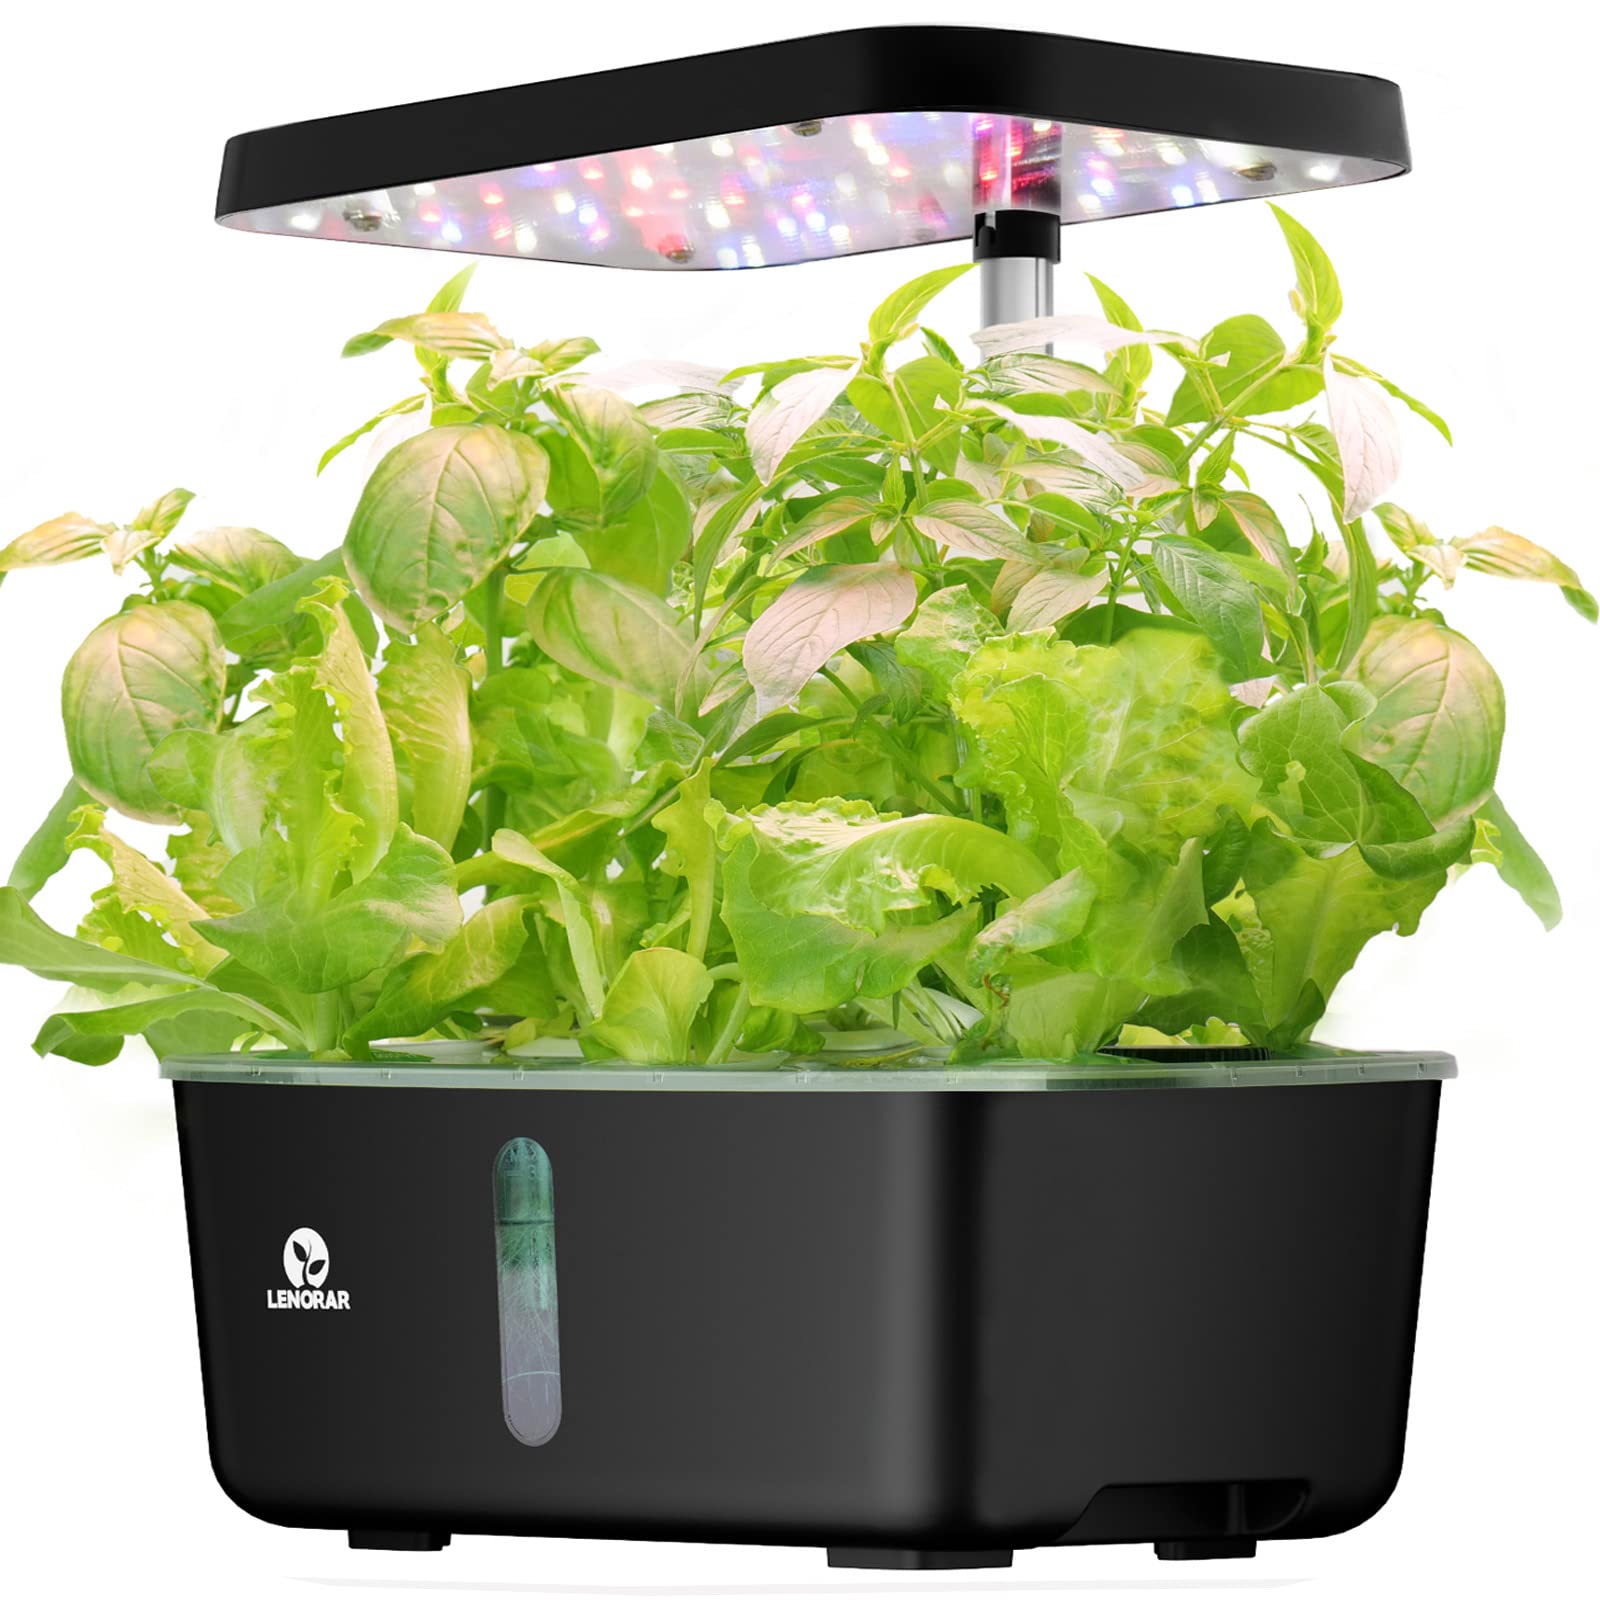 Hydroponics Growing System, 8 Pods Desktop Hydroponic Garden with Custom Spectrum LED Grow Light for Indoor Plants, Ultra-quiet Automatic Cycle Planting Herb Garden Kit with Water Pump for Home Office